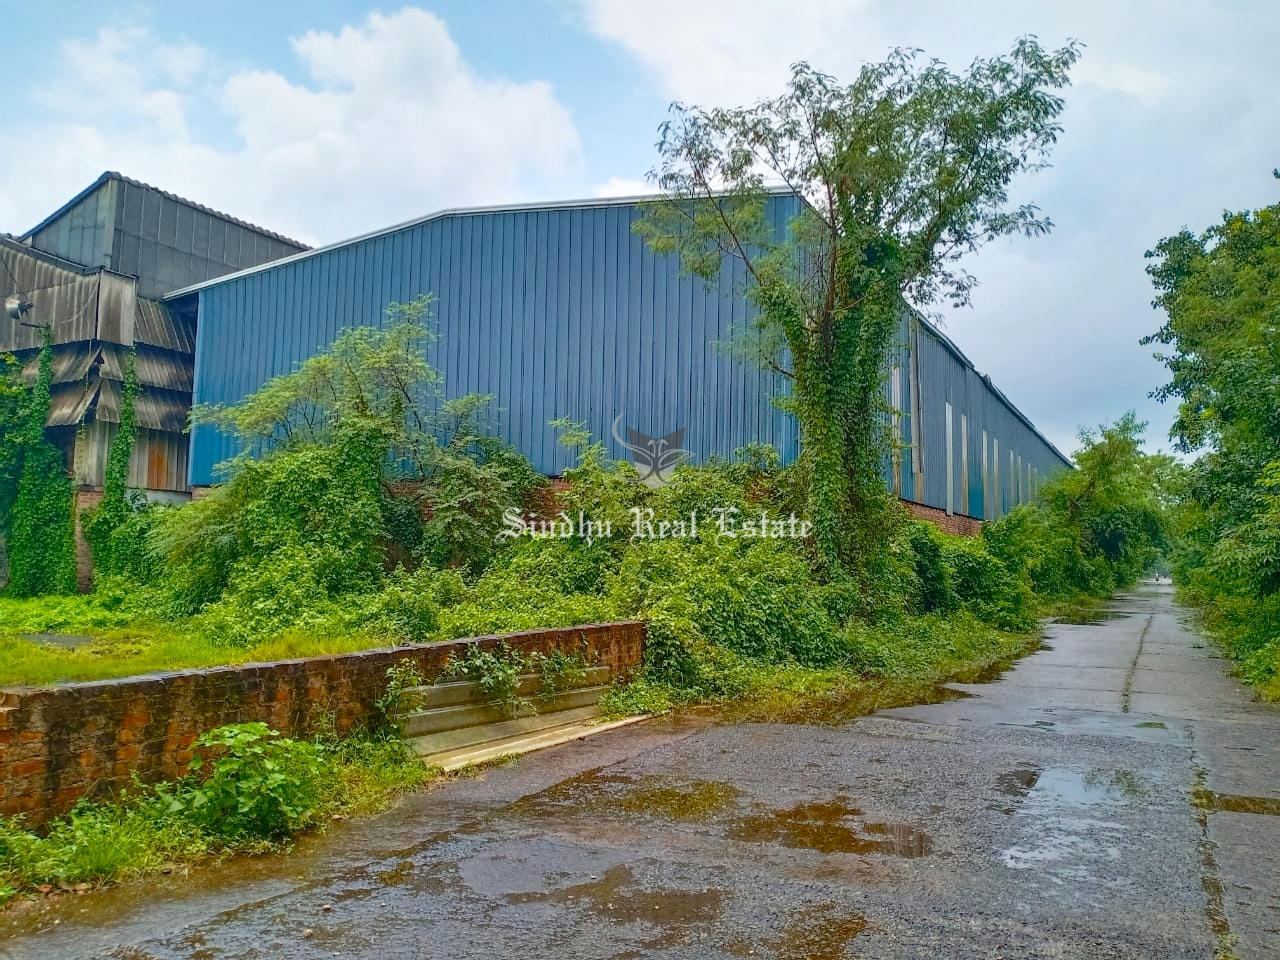 1 lac sqft warehouse available for rent on Bombay Highway